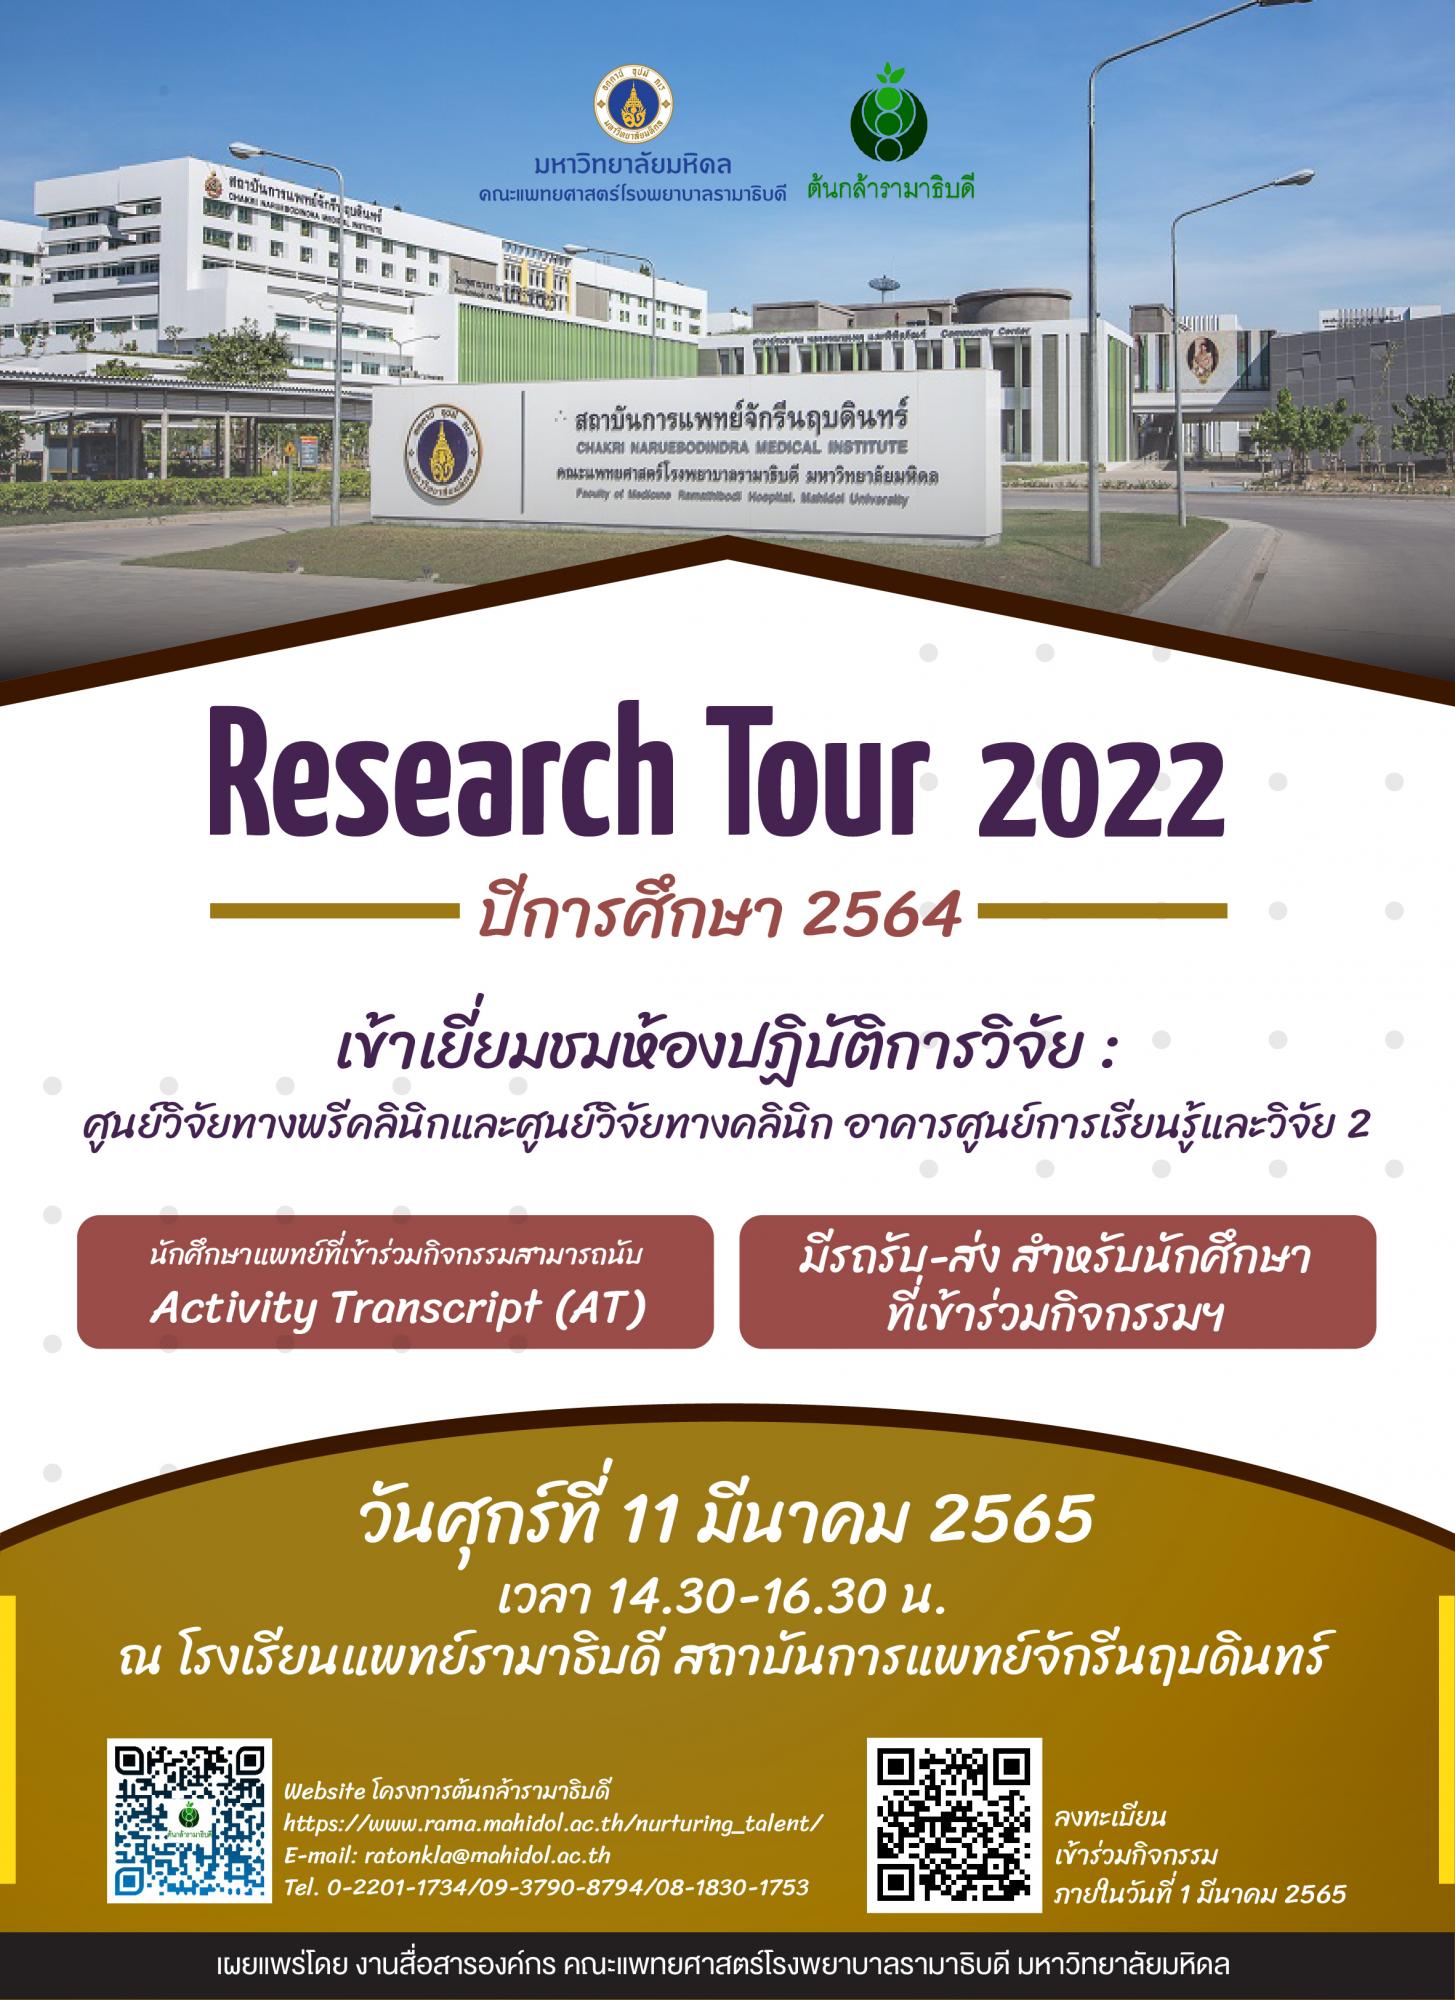 Research Tour 2022